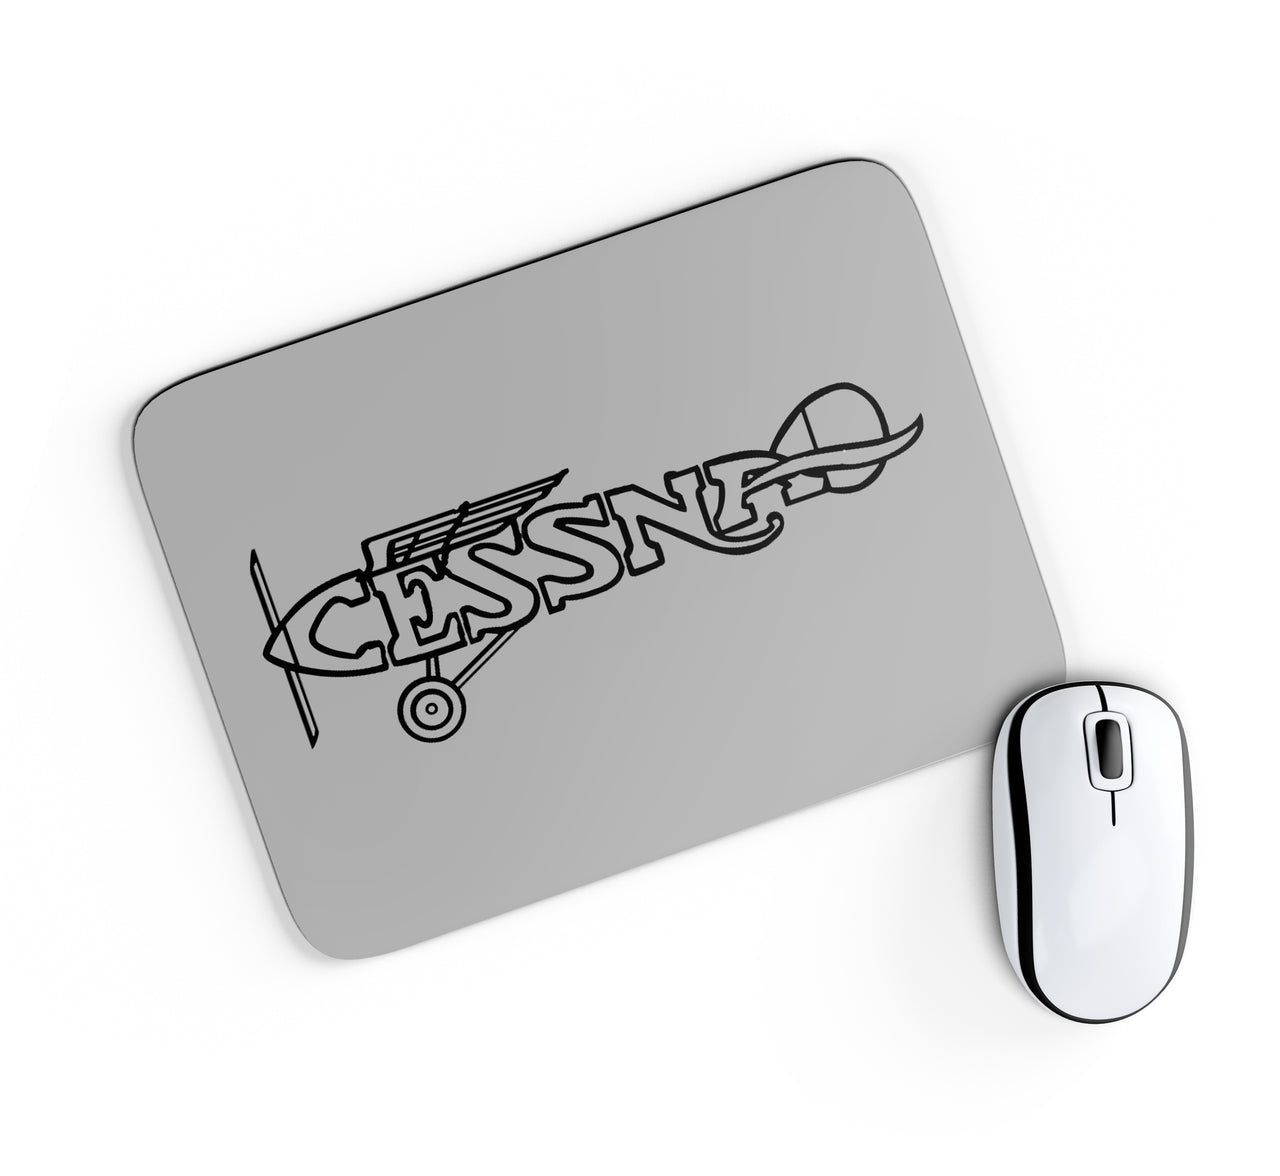 Special Cessna Text Designed Mouse Pads